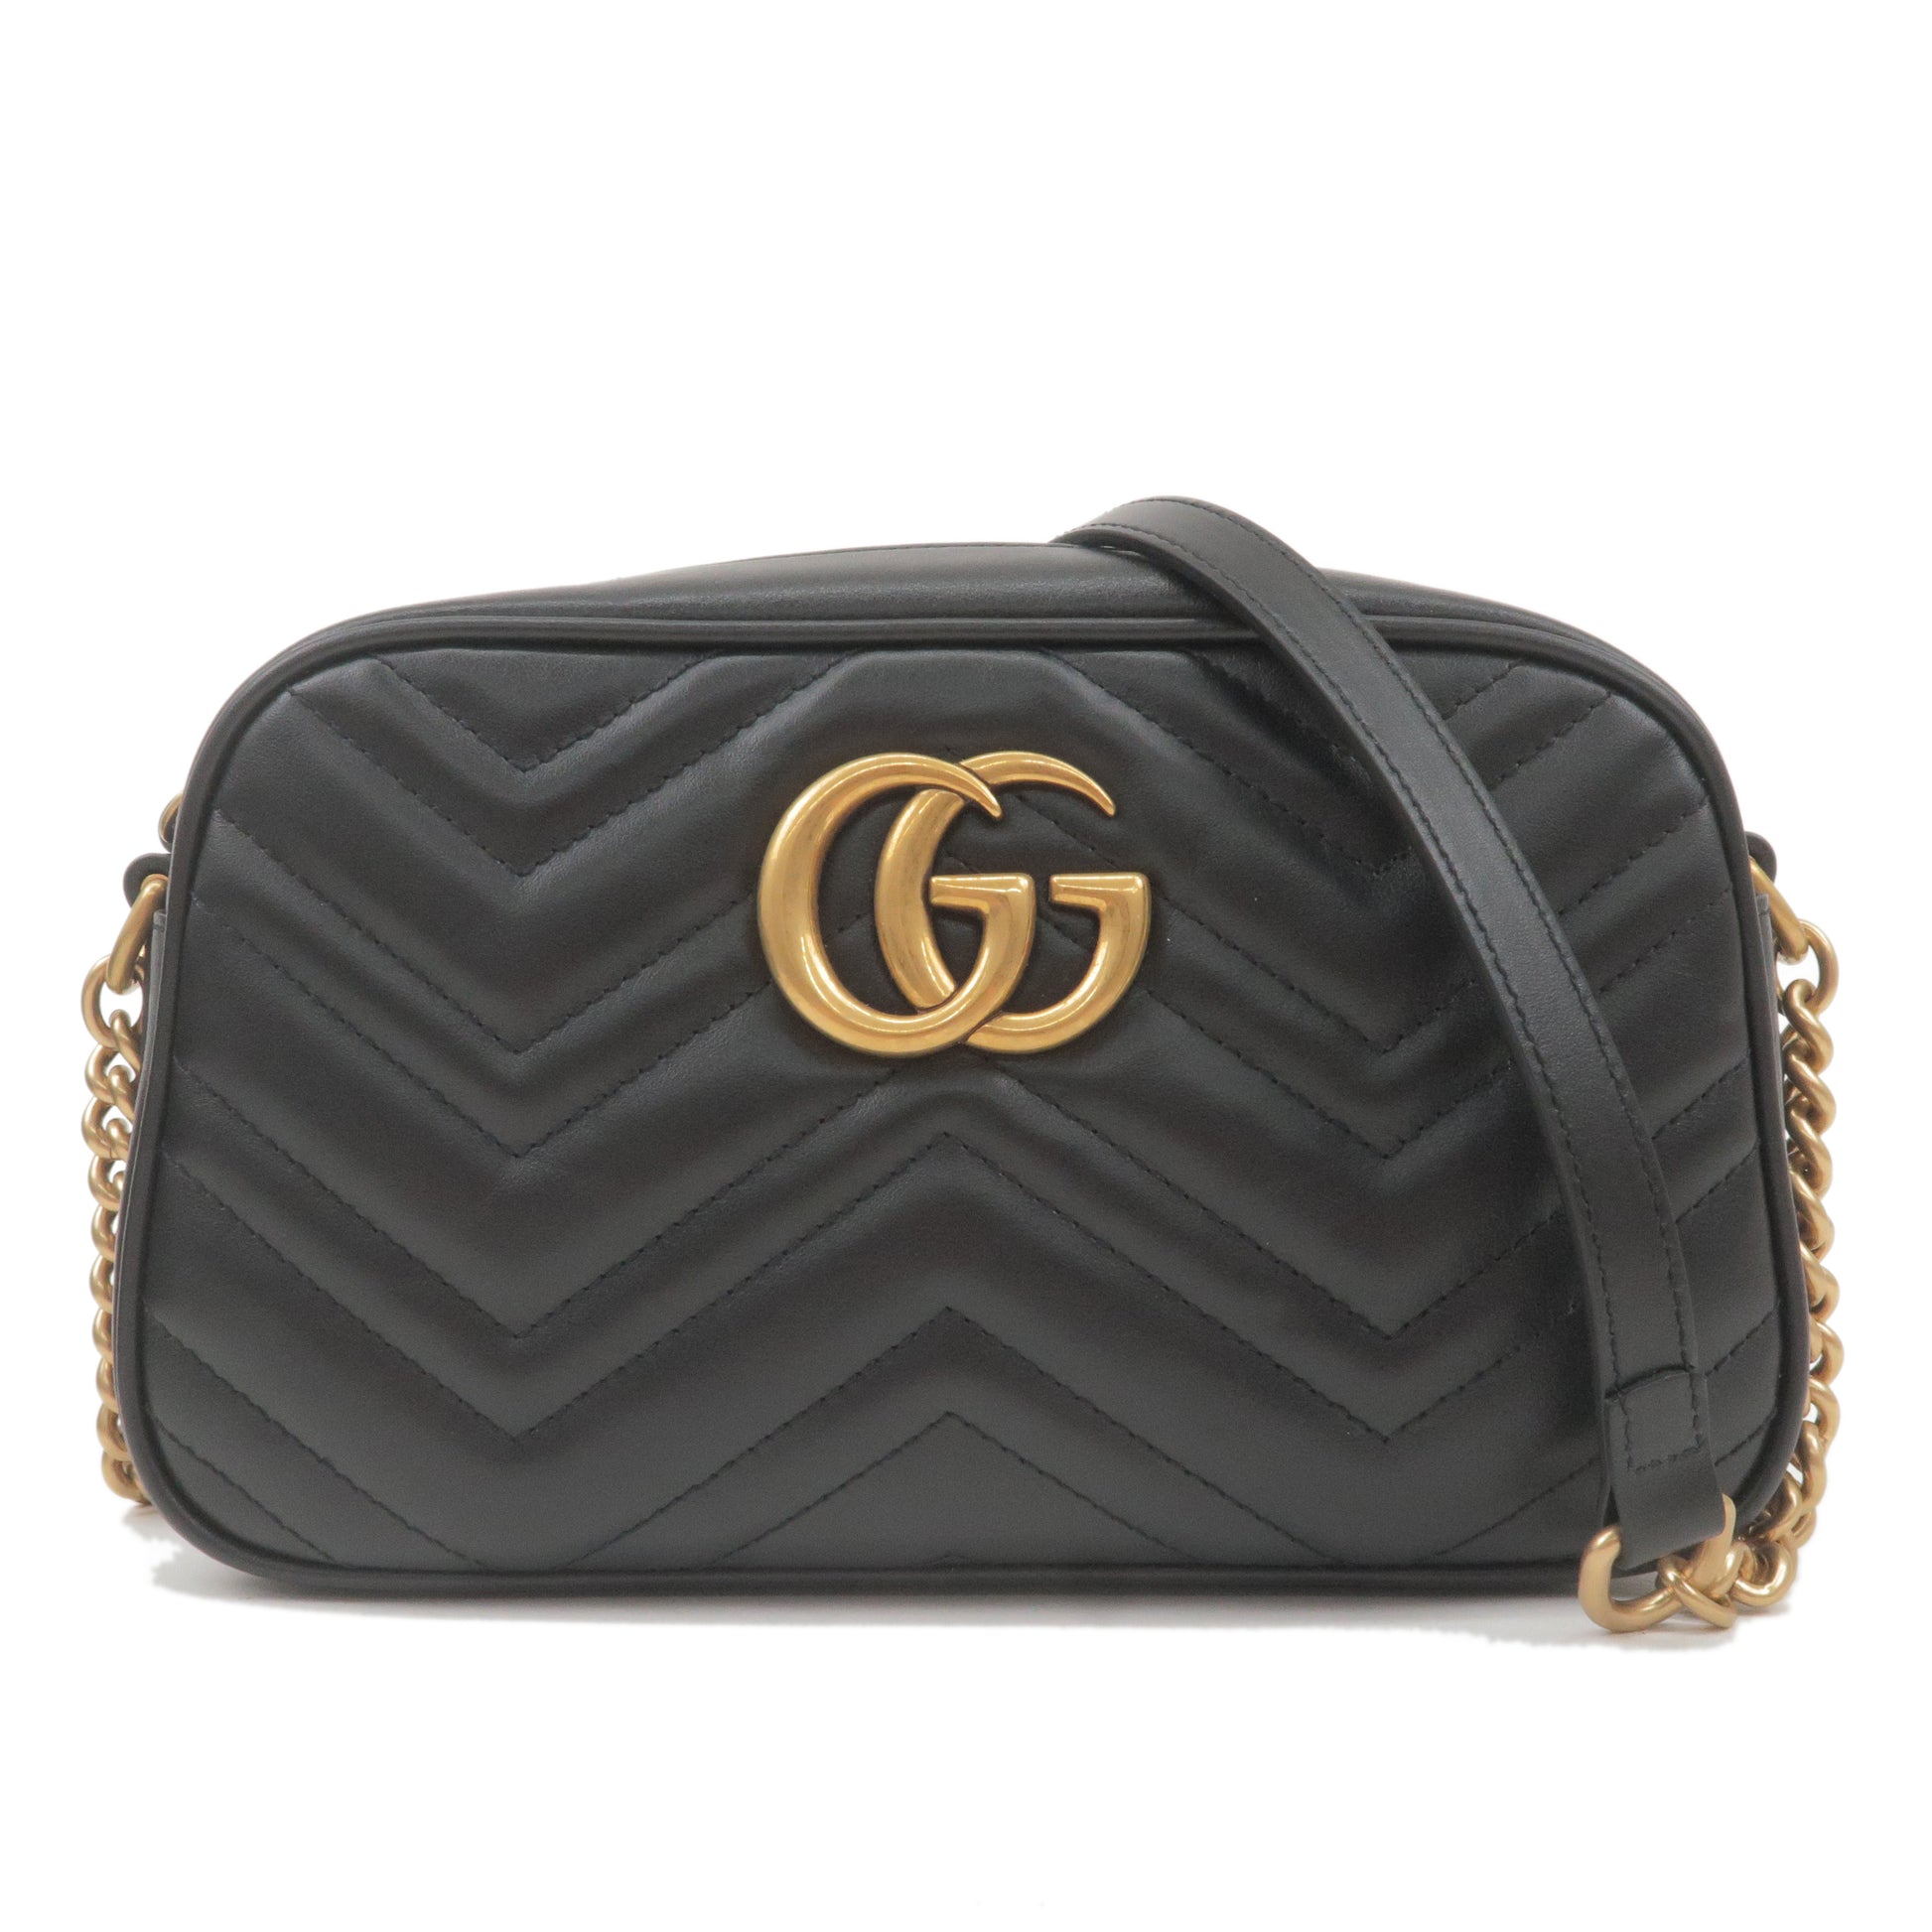 Gucci - GG Marmont Leather Cross-body Bag - Womens - Black